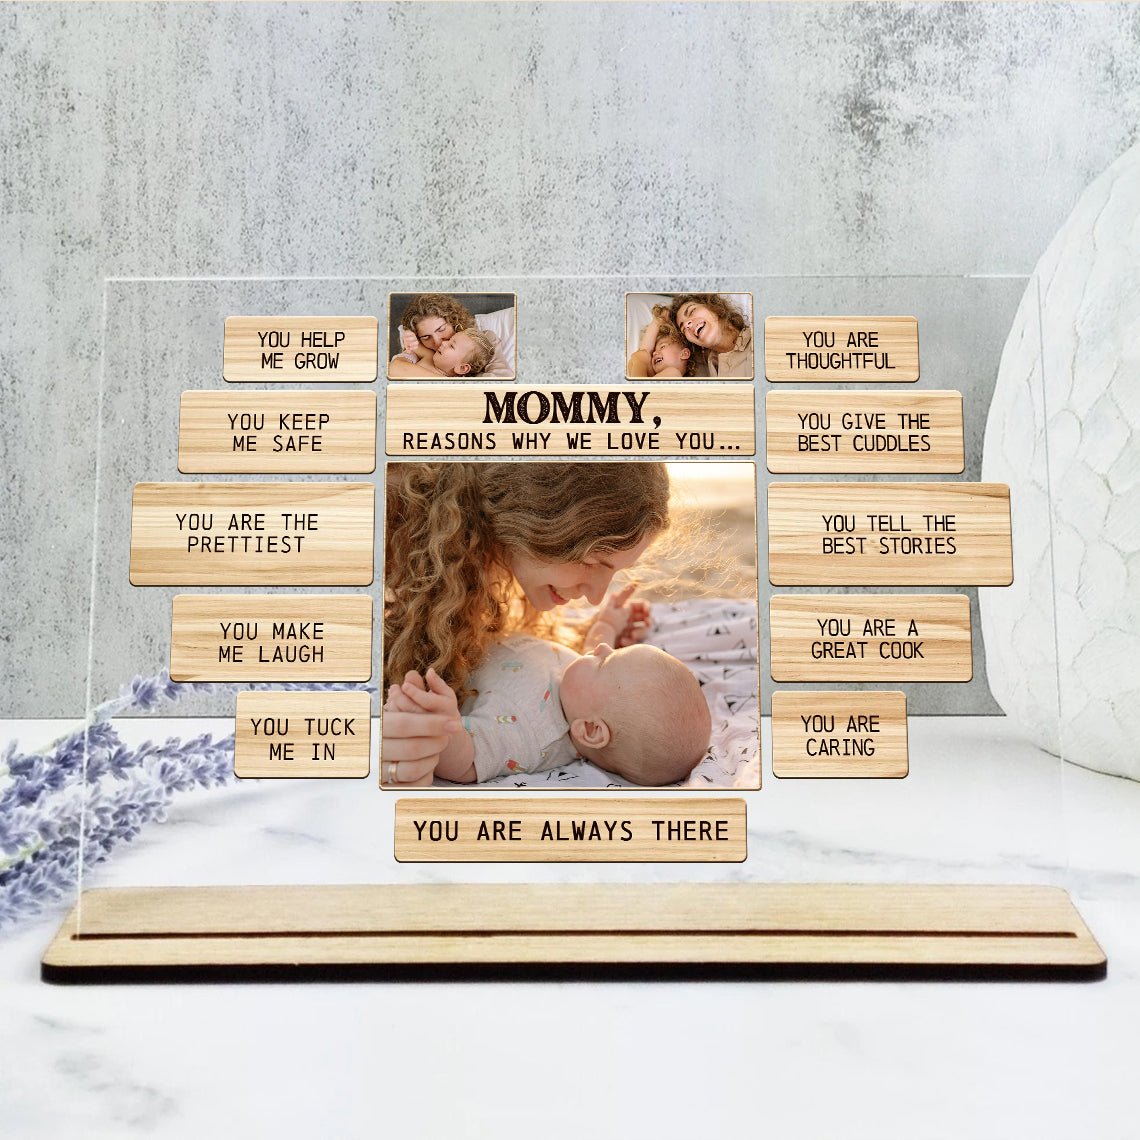 Mommy,Reasons Why We Love You Plaque - Personalized Acrylic Plaque - Best Gift for Mother, Grandma